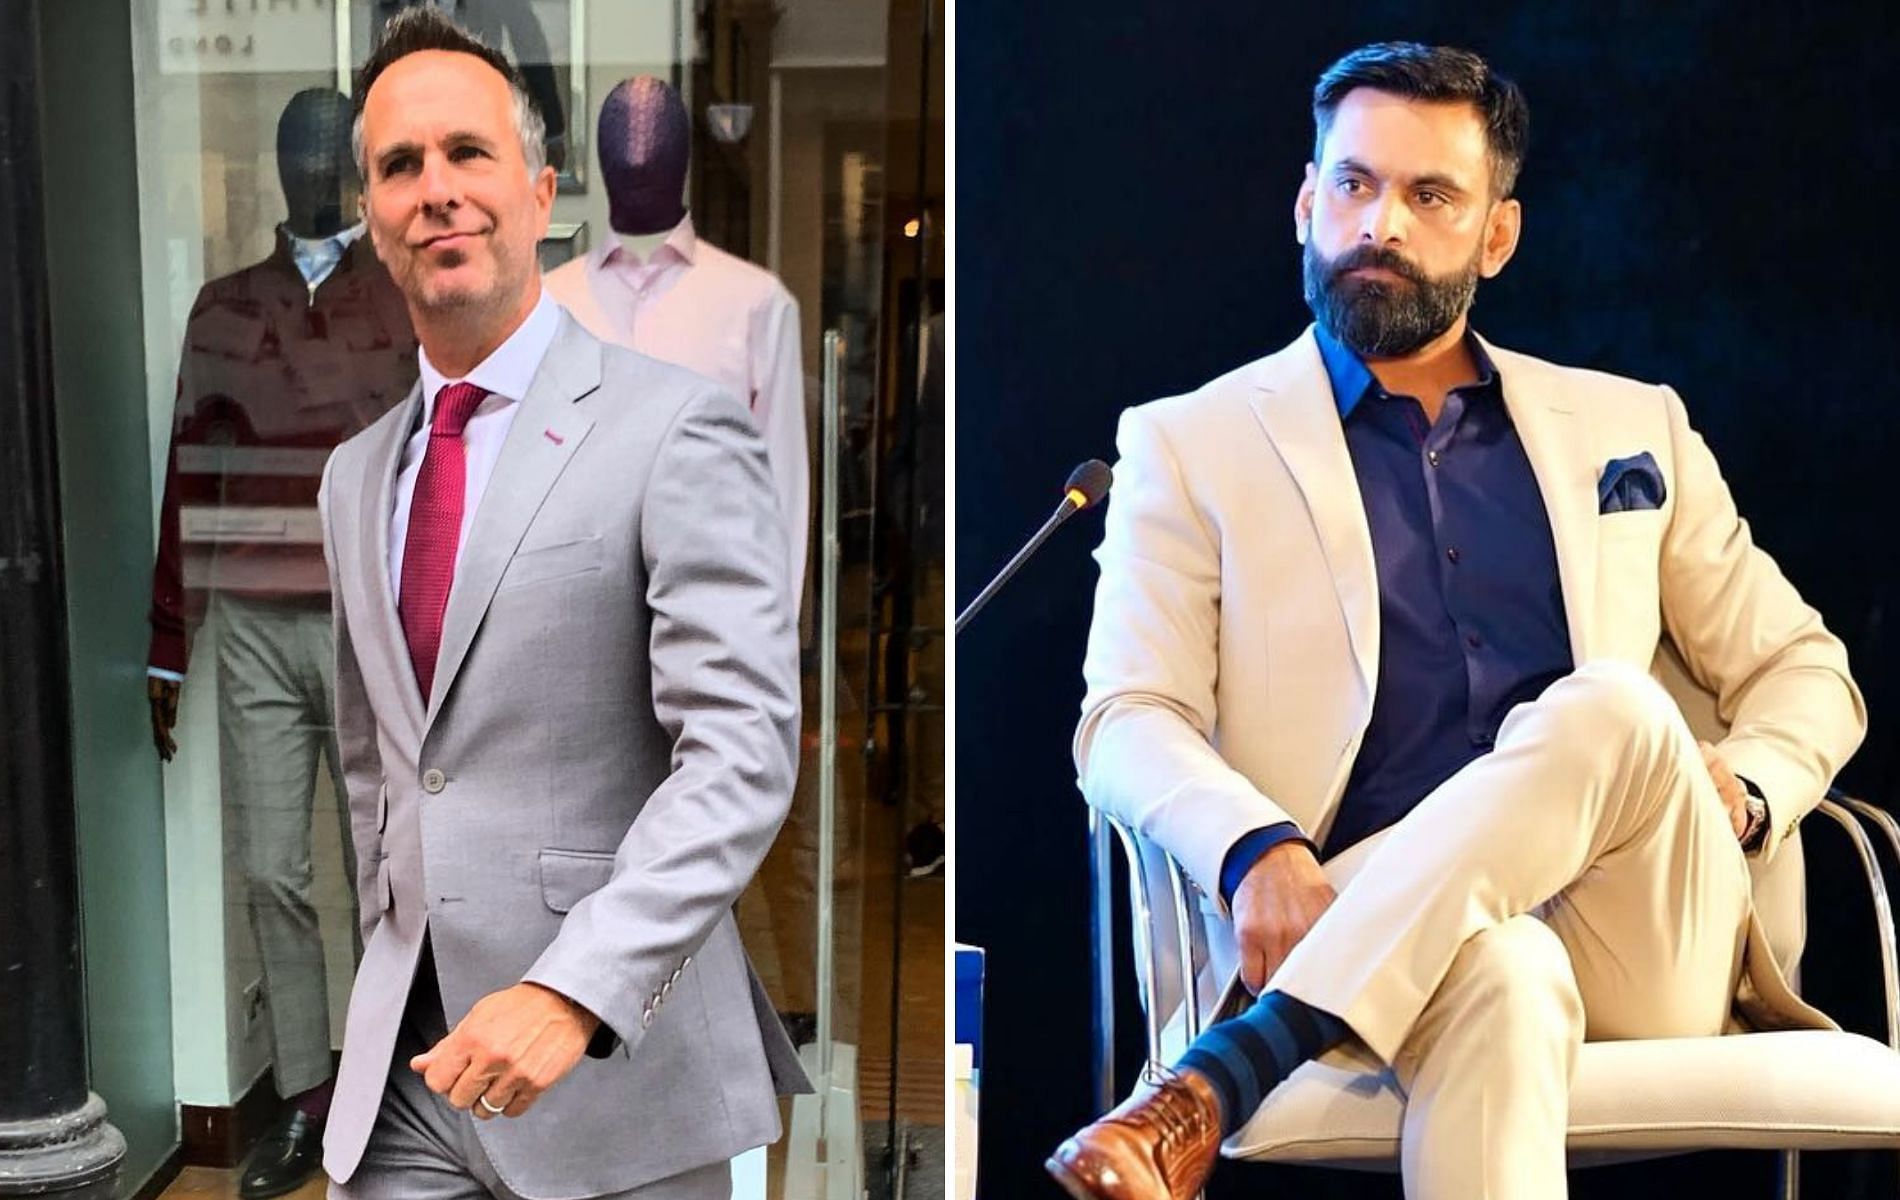 Michael Vaughan (L) and Mohammad Hafeez (R). (Pics: Instagram)